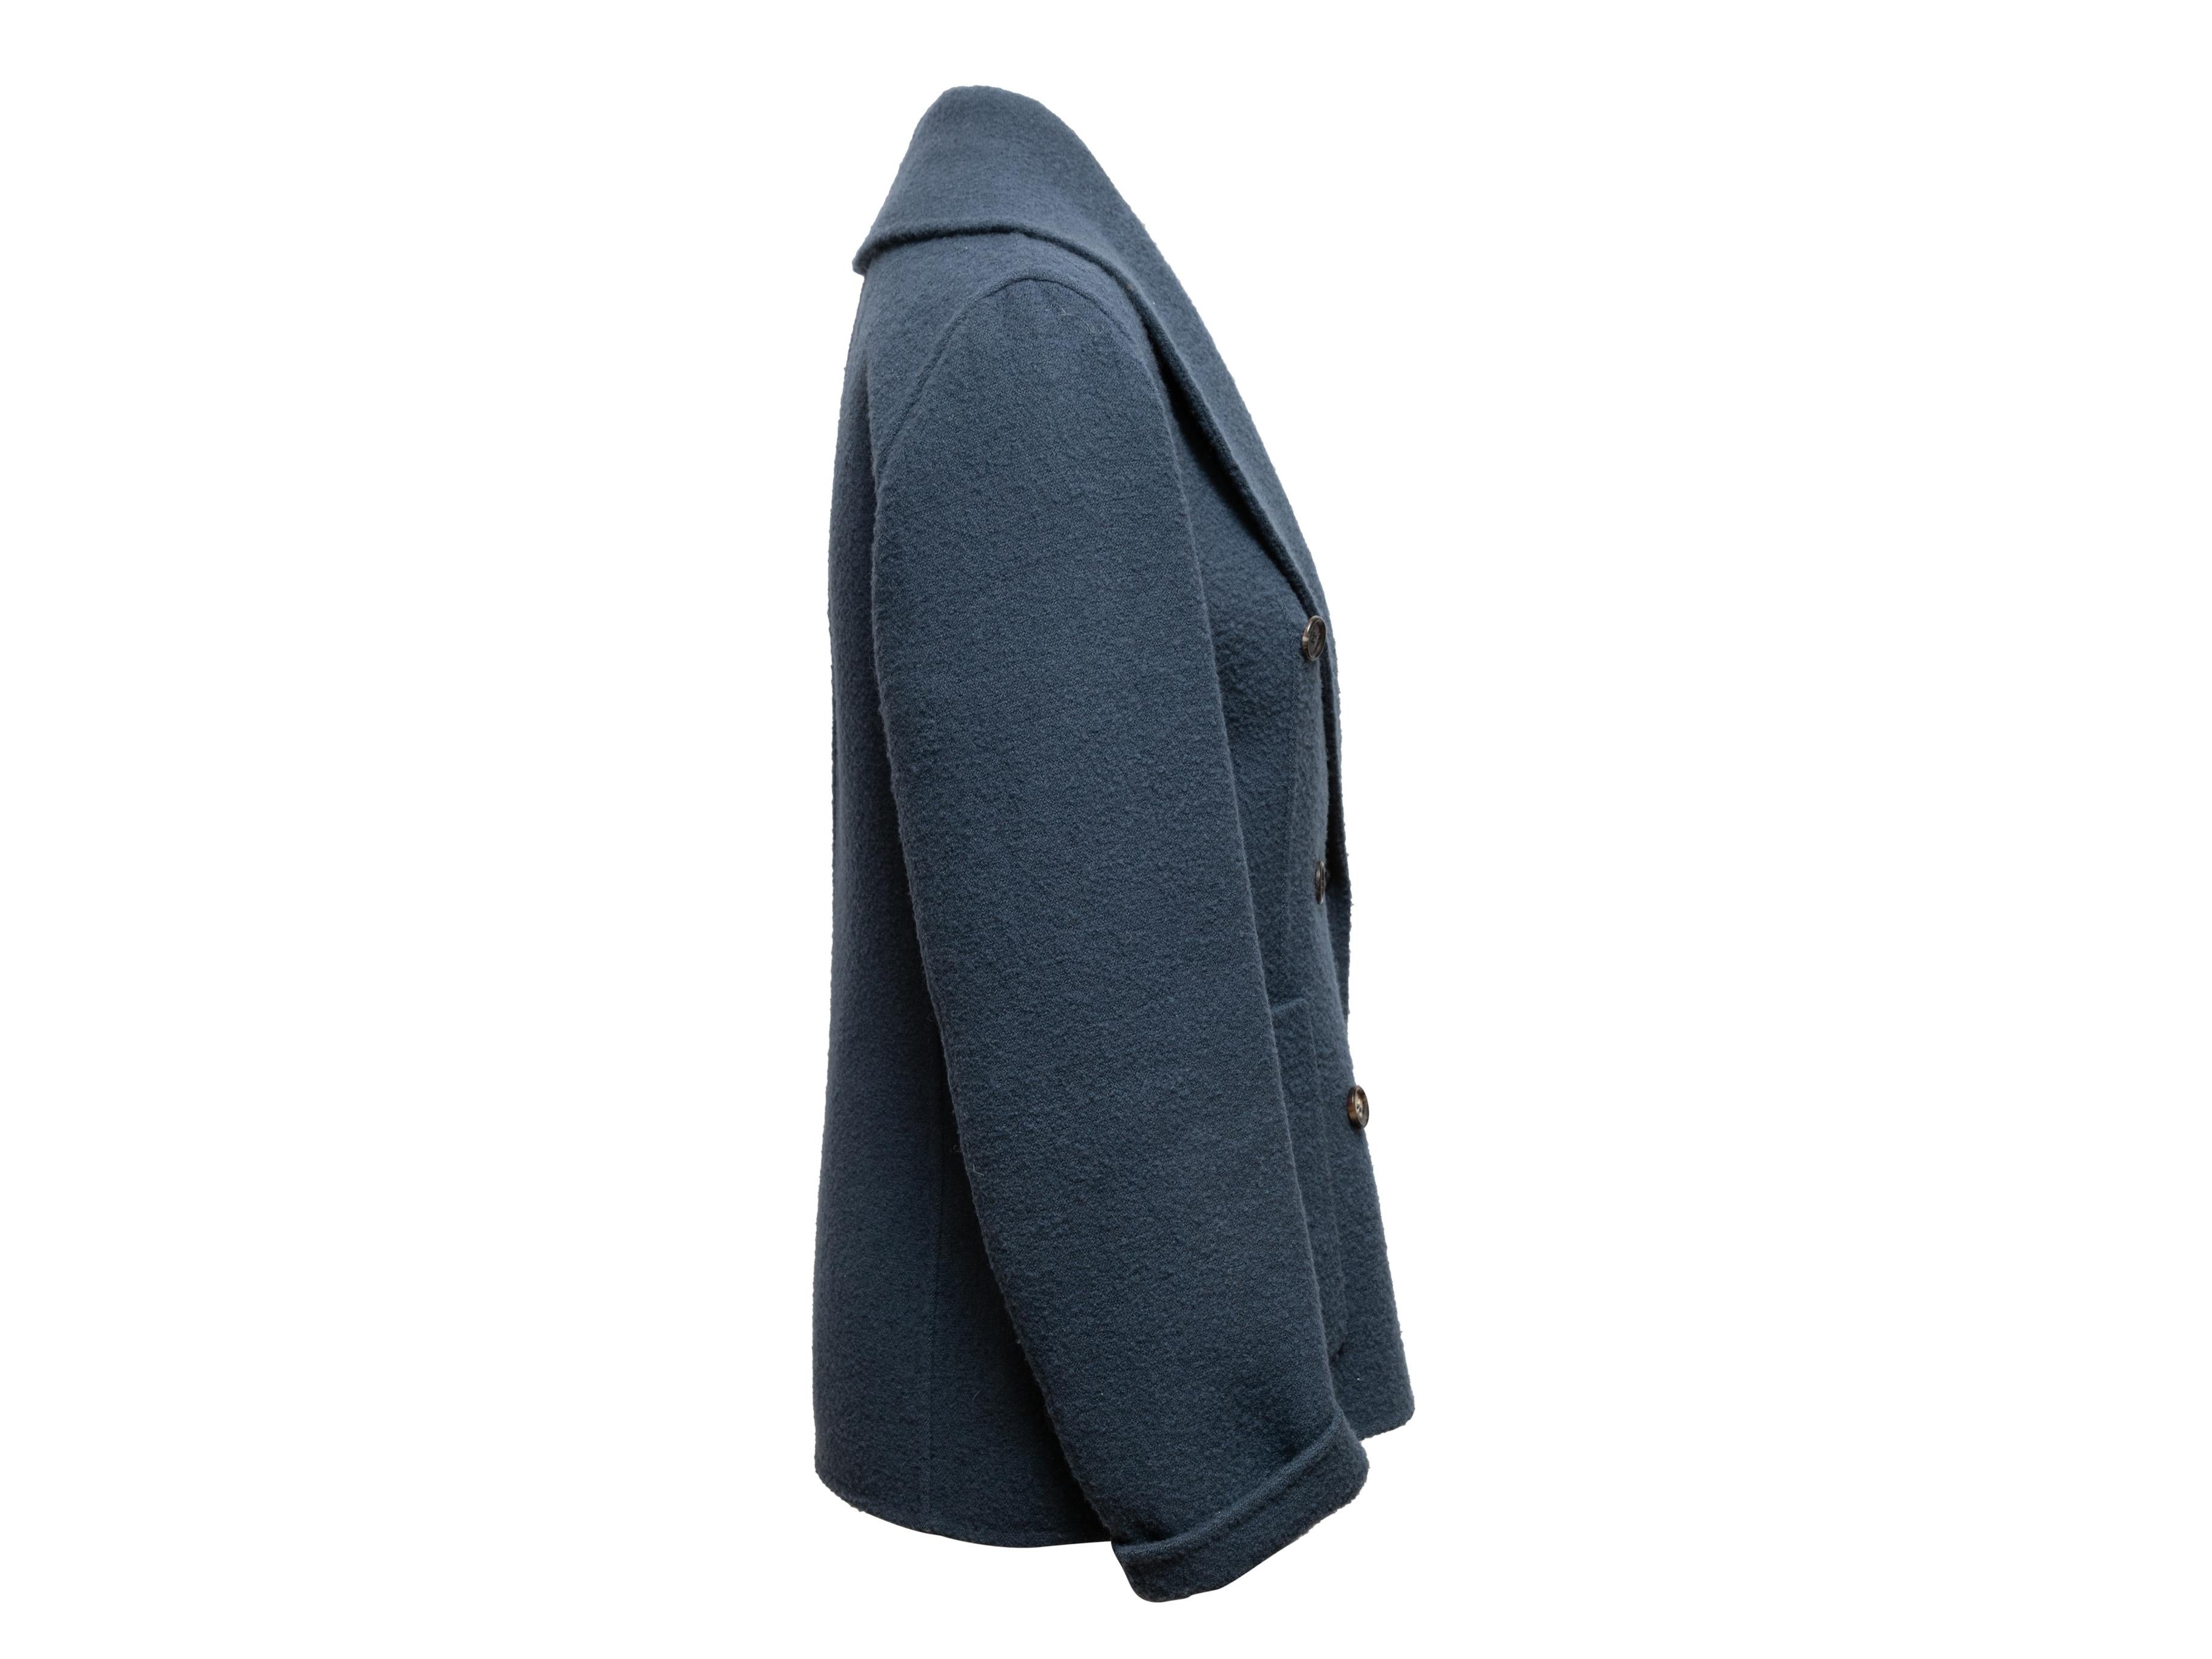 >Navy double-breasted wool jacket by Celine. Shawl collar. Dual hip pockets. Button closures at front. 40